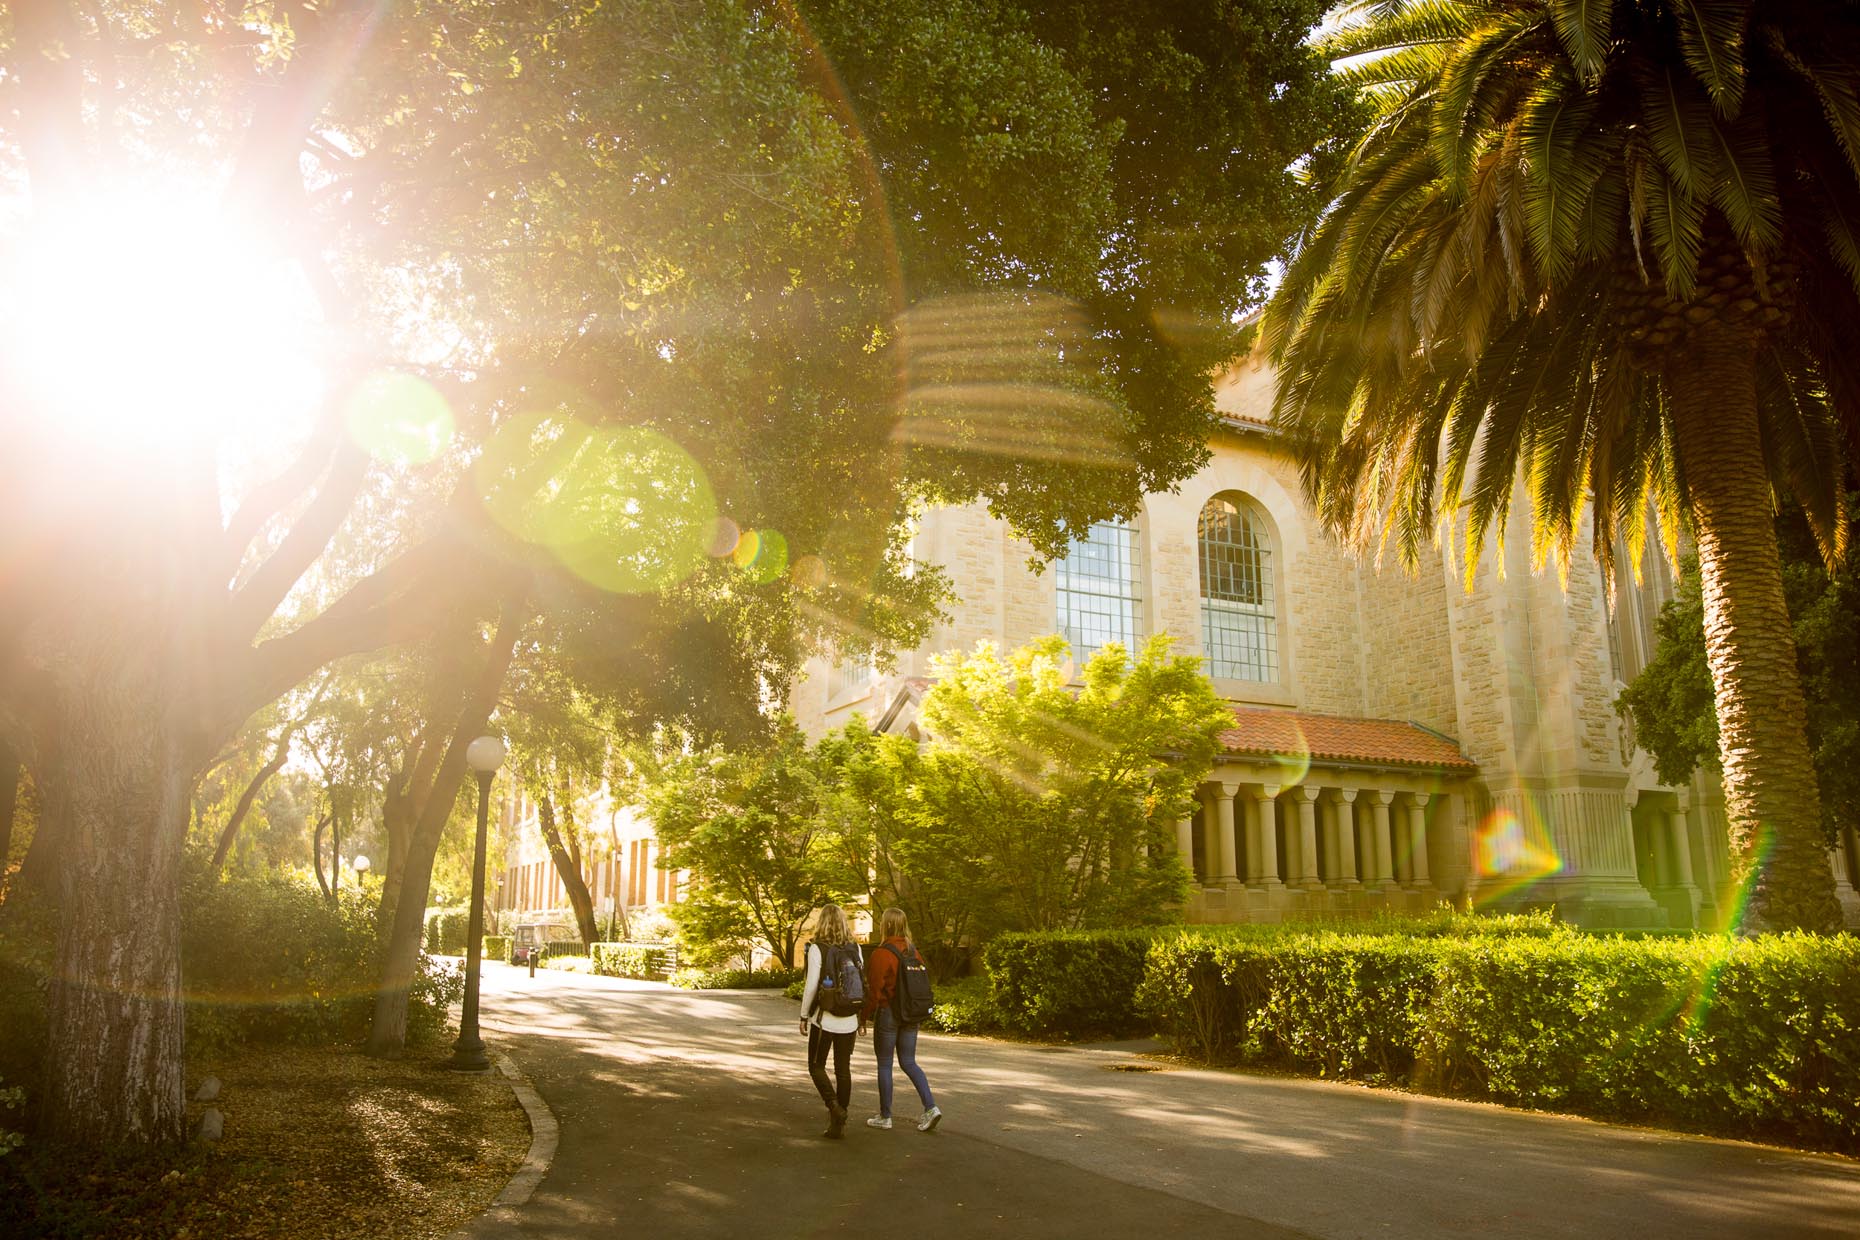 College campus beauty at Stanford University. John Davis is an education marketing photographer.